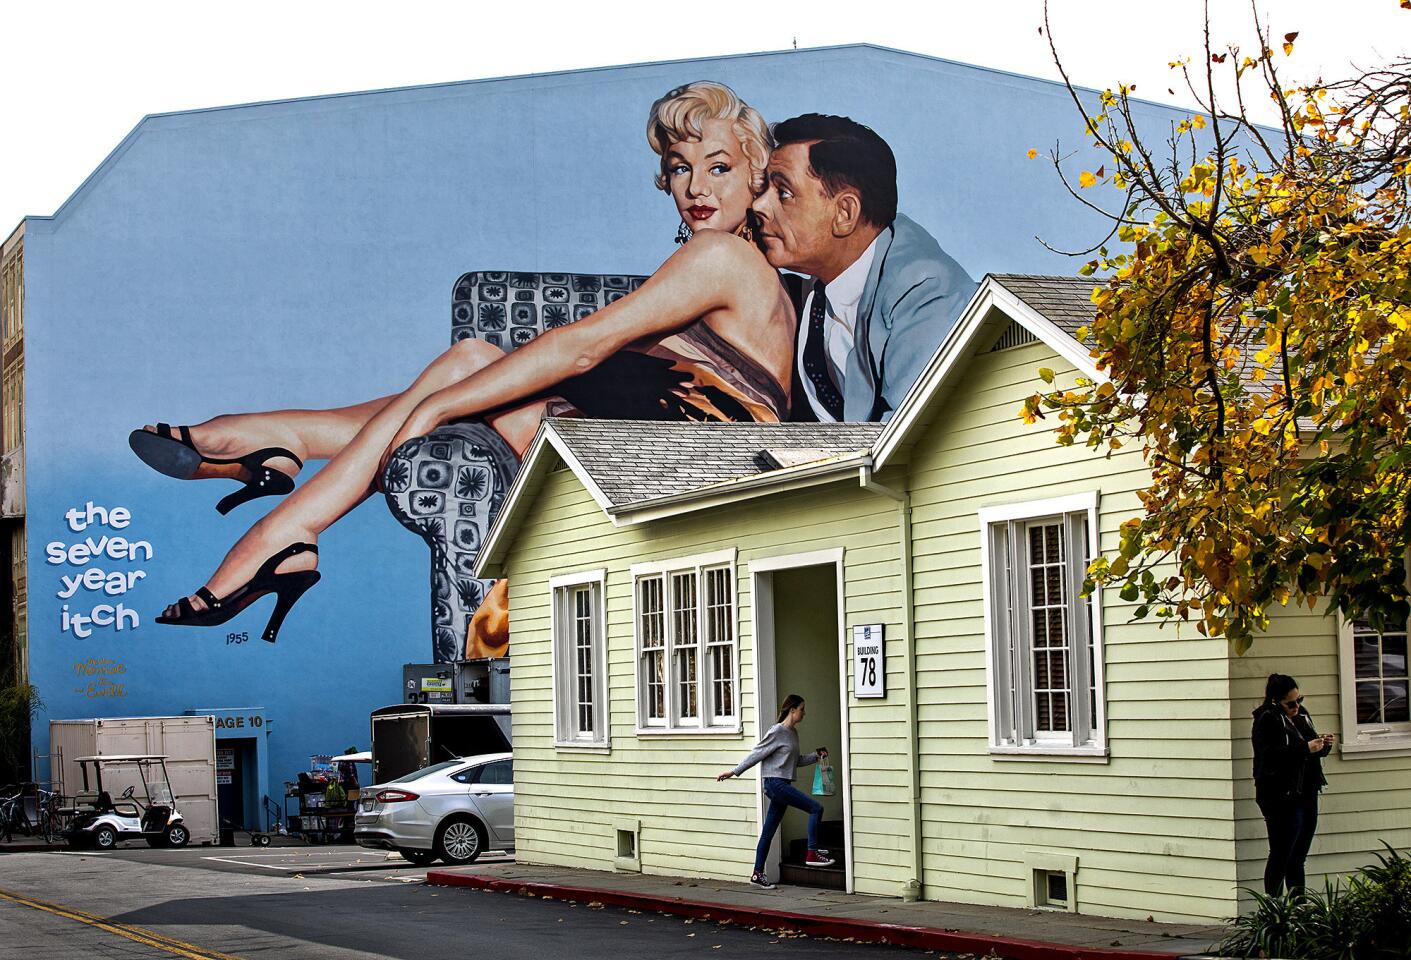 An entire exterior wall of Stage 10 on the Fox Studios lot is covered by a mural depicting stars Marilyn Monroe and Tom Ewell from the 1955 comedy "The Seven Year Itch."